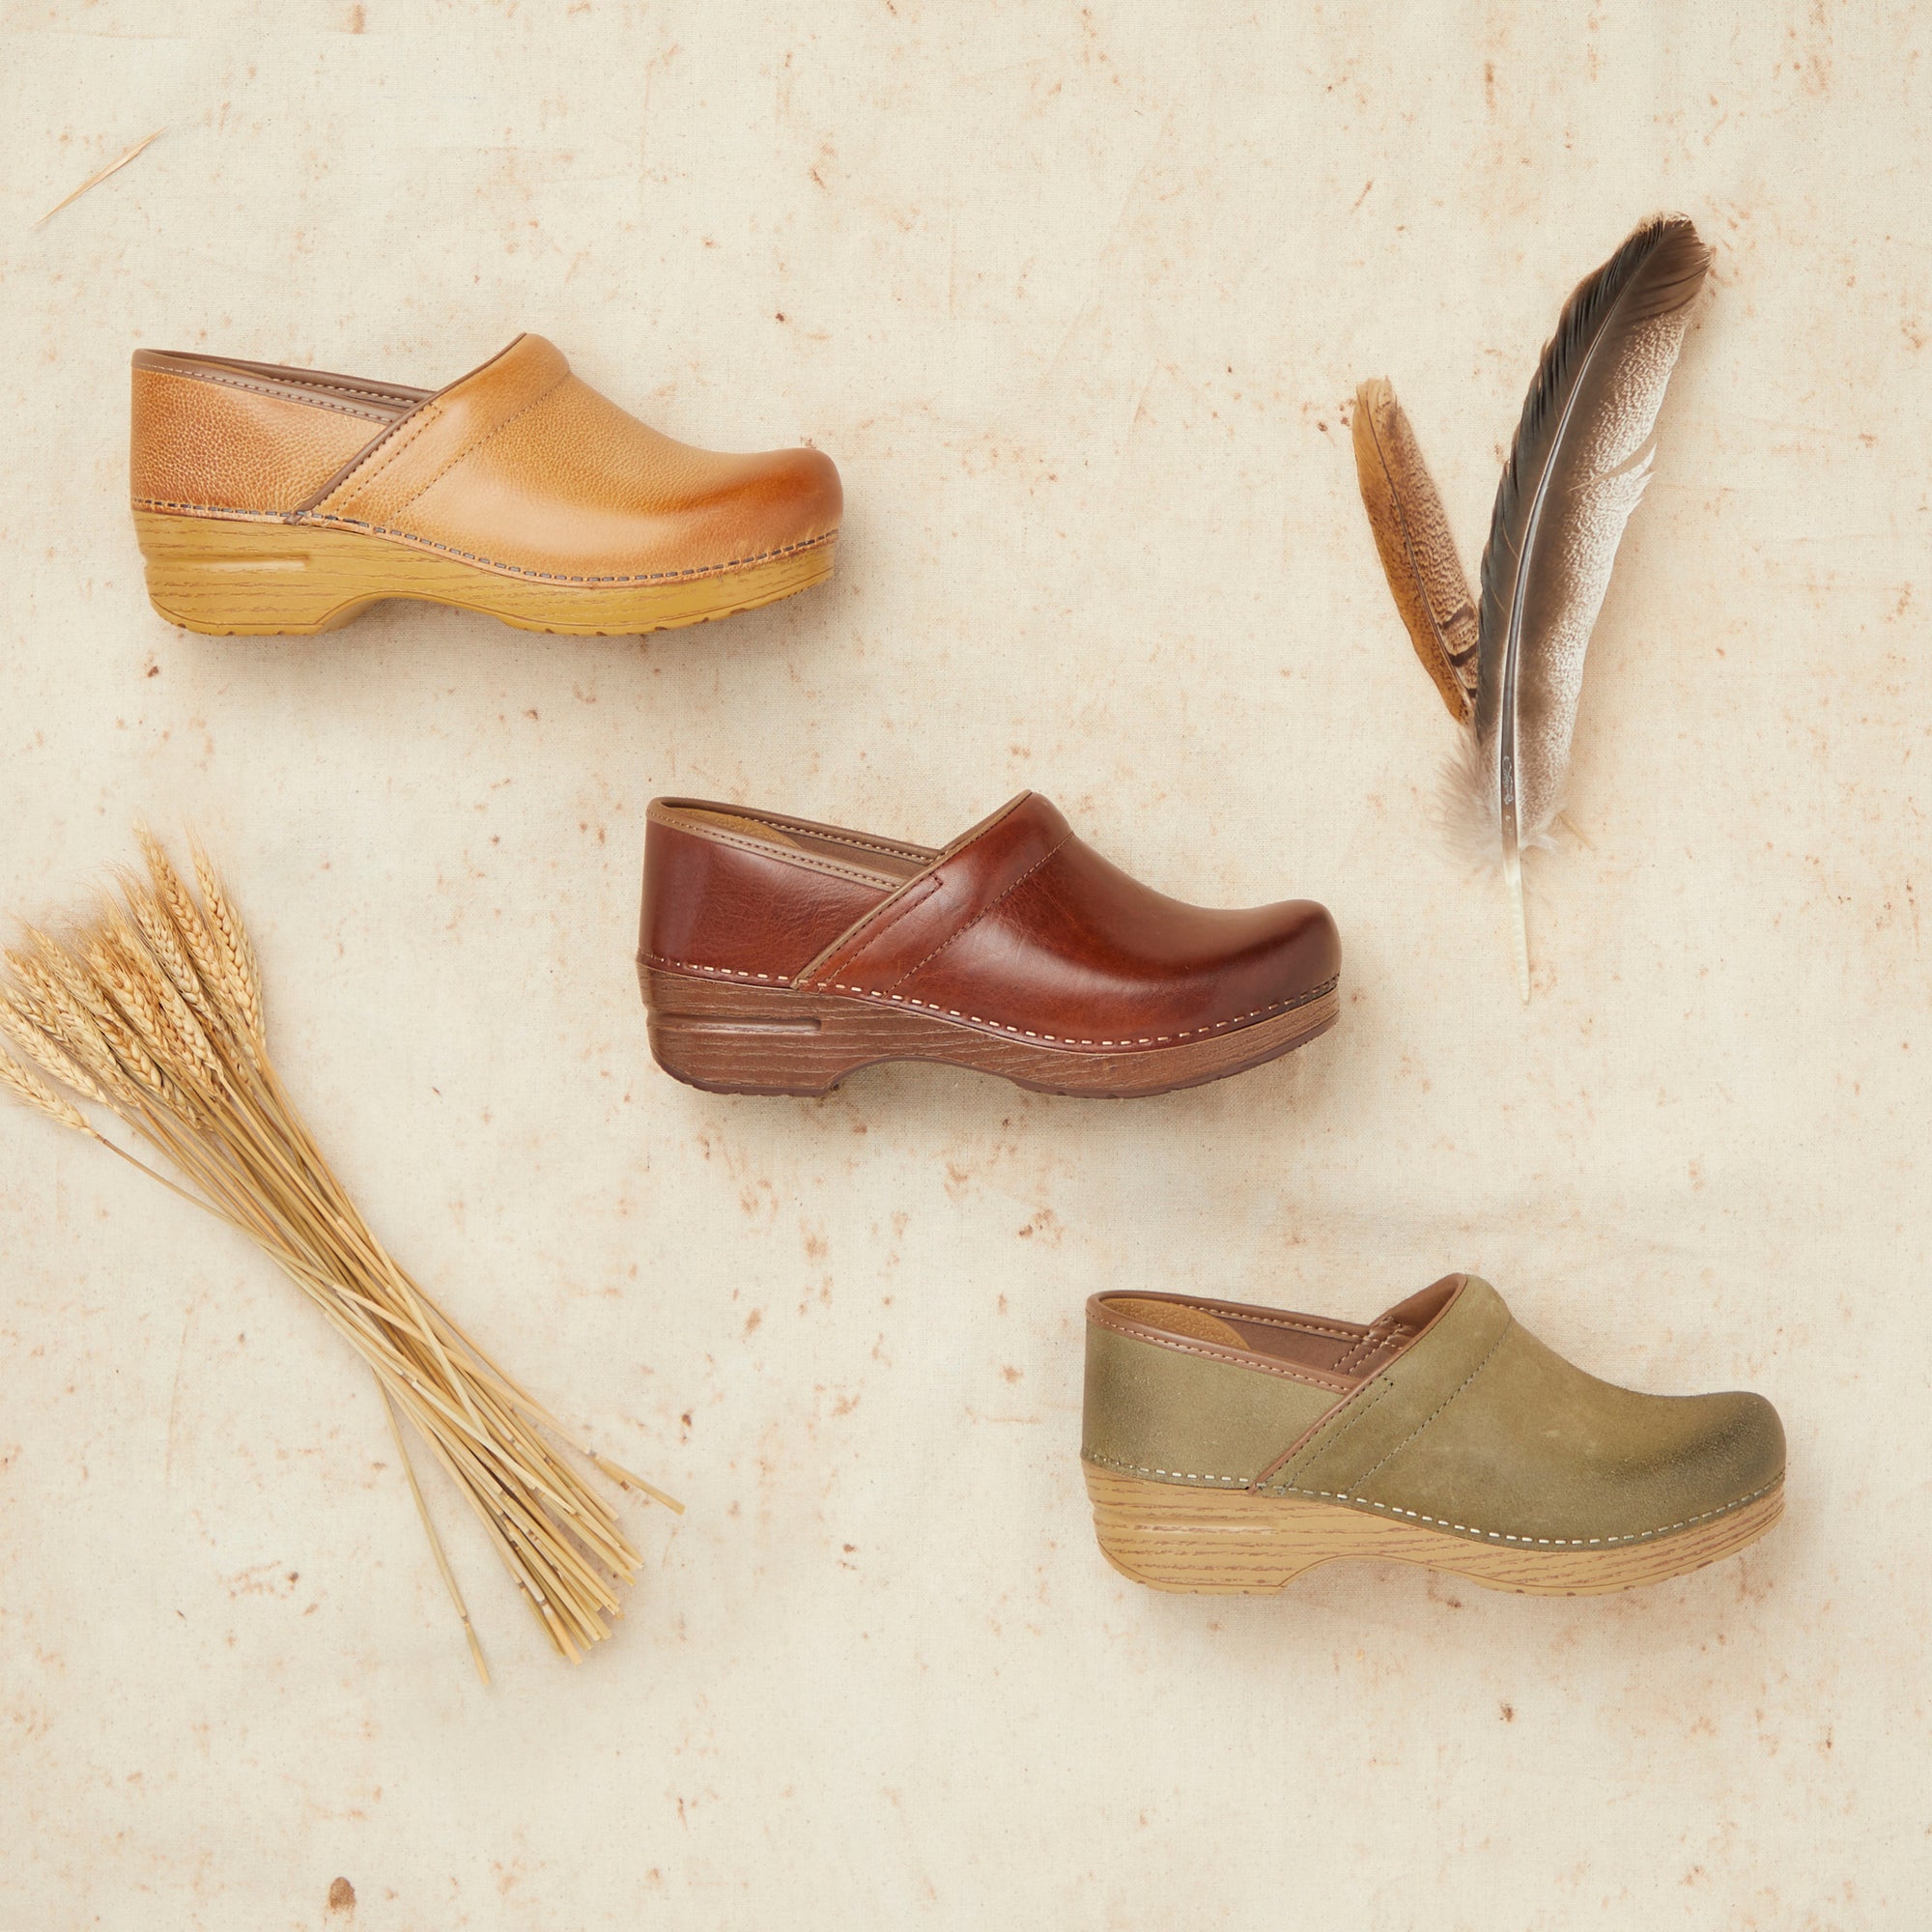 A light brown clog, a rich brown clog, and a green clog from Dansko.